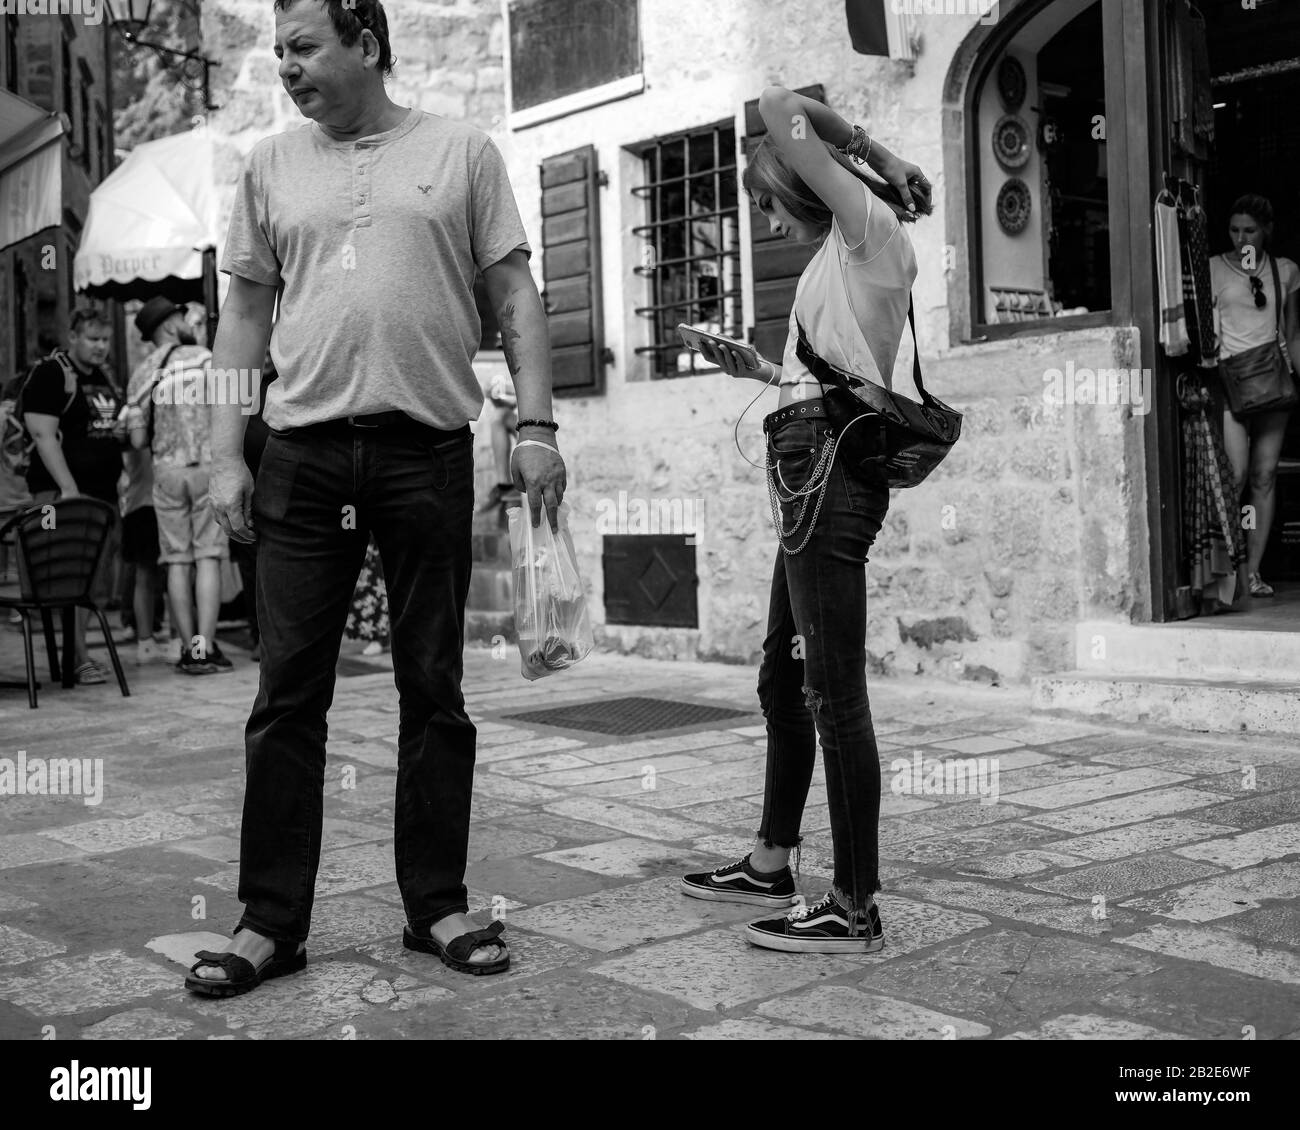 Montenegro, Sep 22, 2019:  Tourists at one of the squares in Kotor Old Town Stock Photo